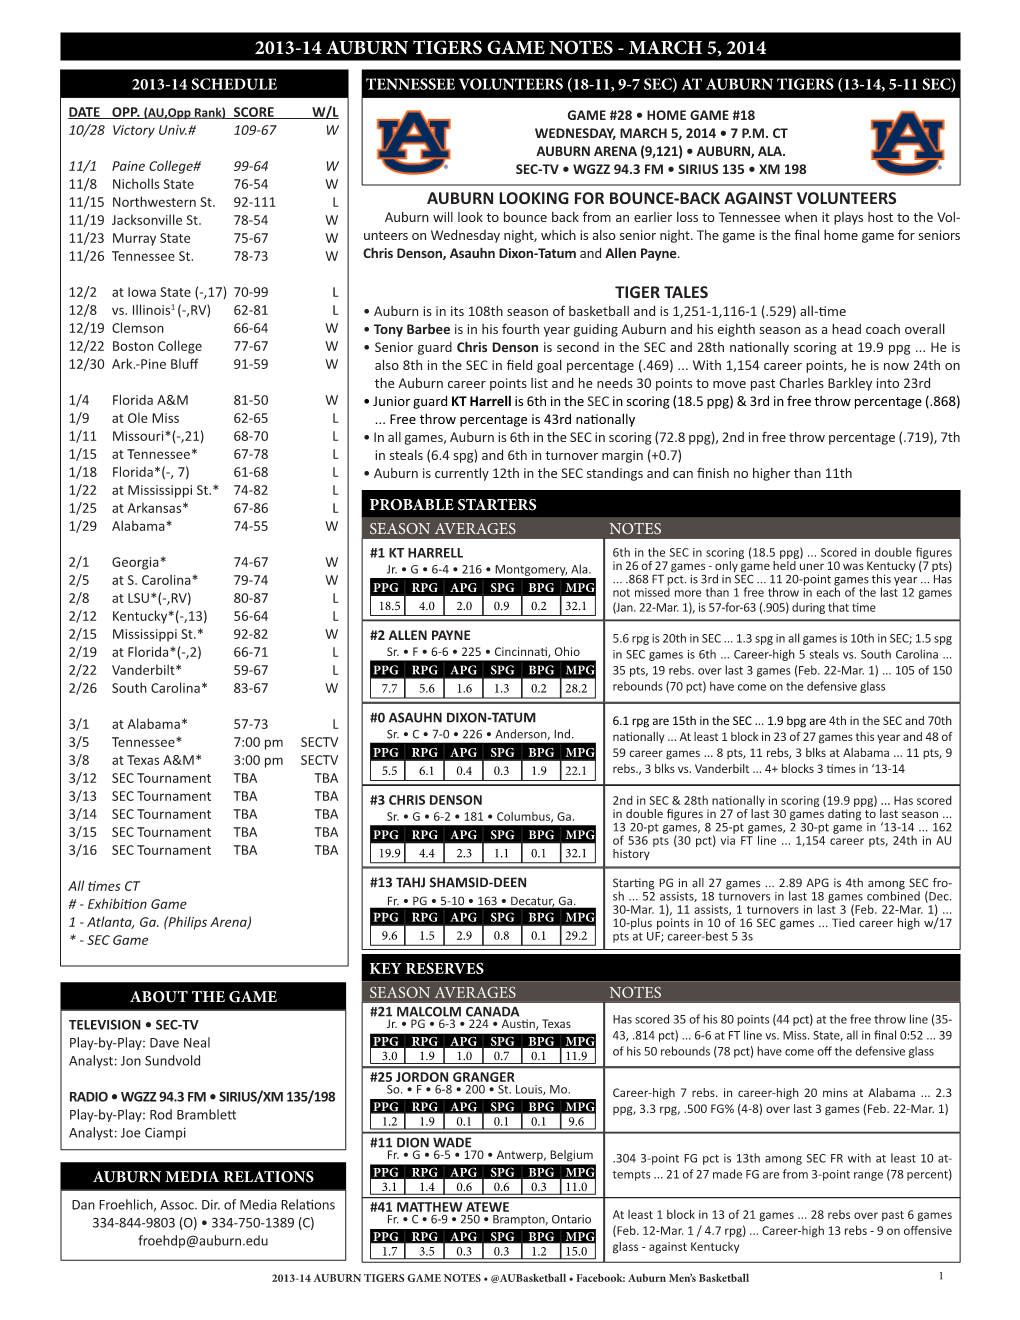 2013-14 Auburn Tigers Game Notes - March 5, 2014